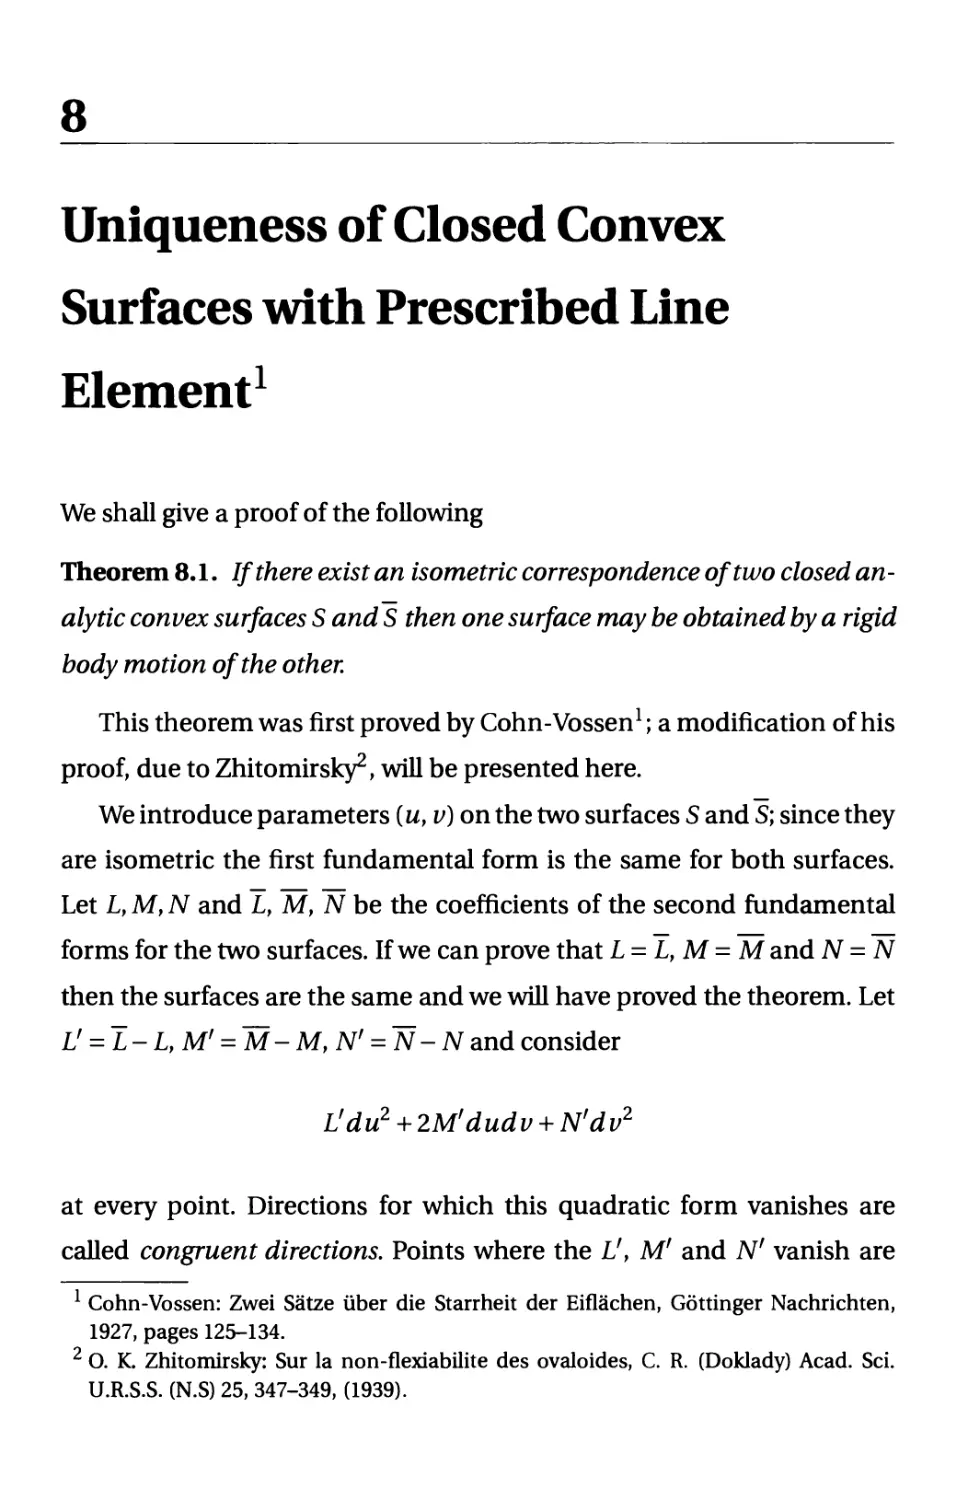 8. Uniqueness of Closed Convex Surfaces with Prescribed Line Element